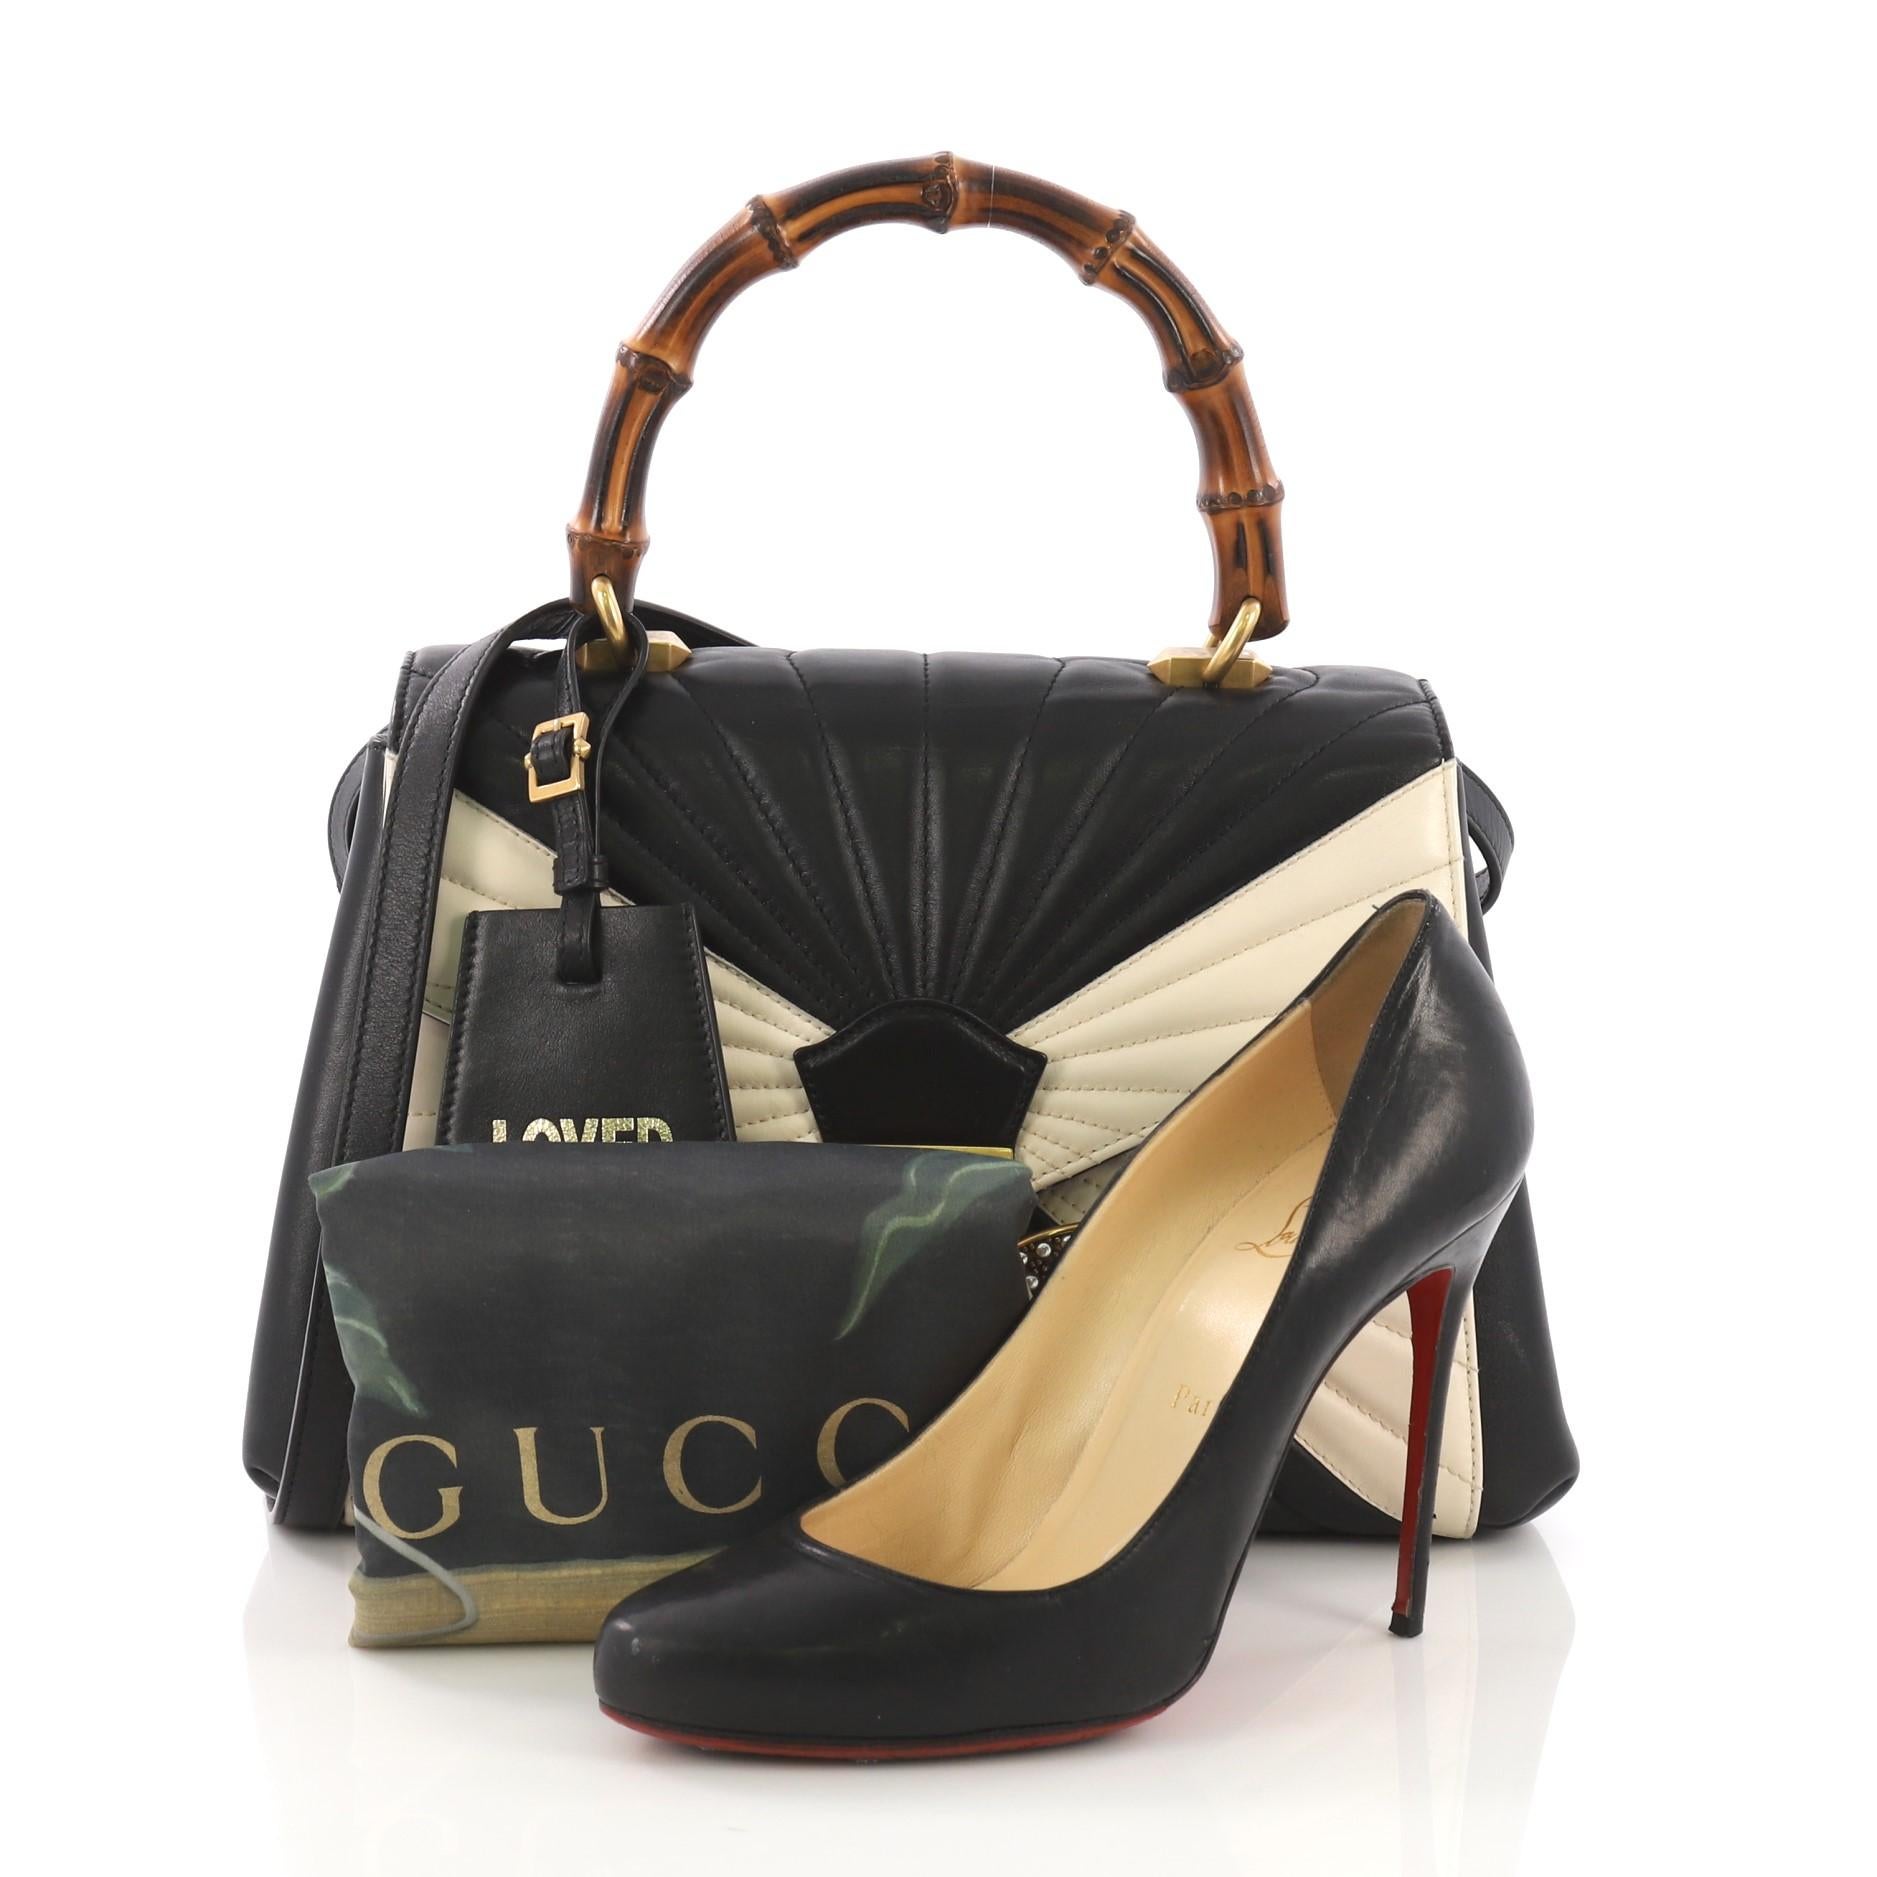 This Gucci Queen Margaret Top Handle Bag Multicolor Quilted Leather Medium, crafted from black and white multicolor quilted leather, features a bamboo top handle, bejeweled bee on its flap, and aged gold-tone hardware. It opens to a pink microfiber